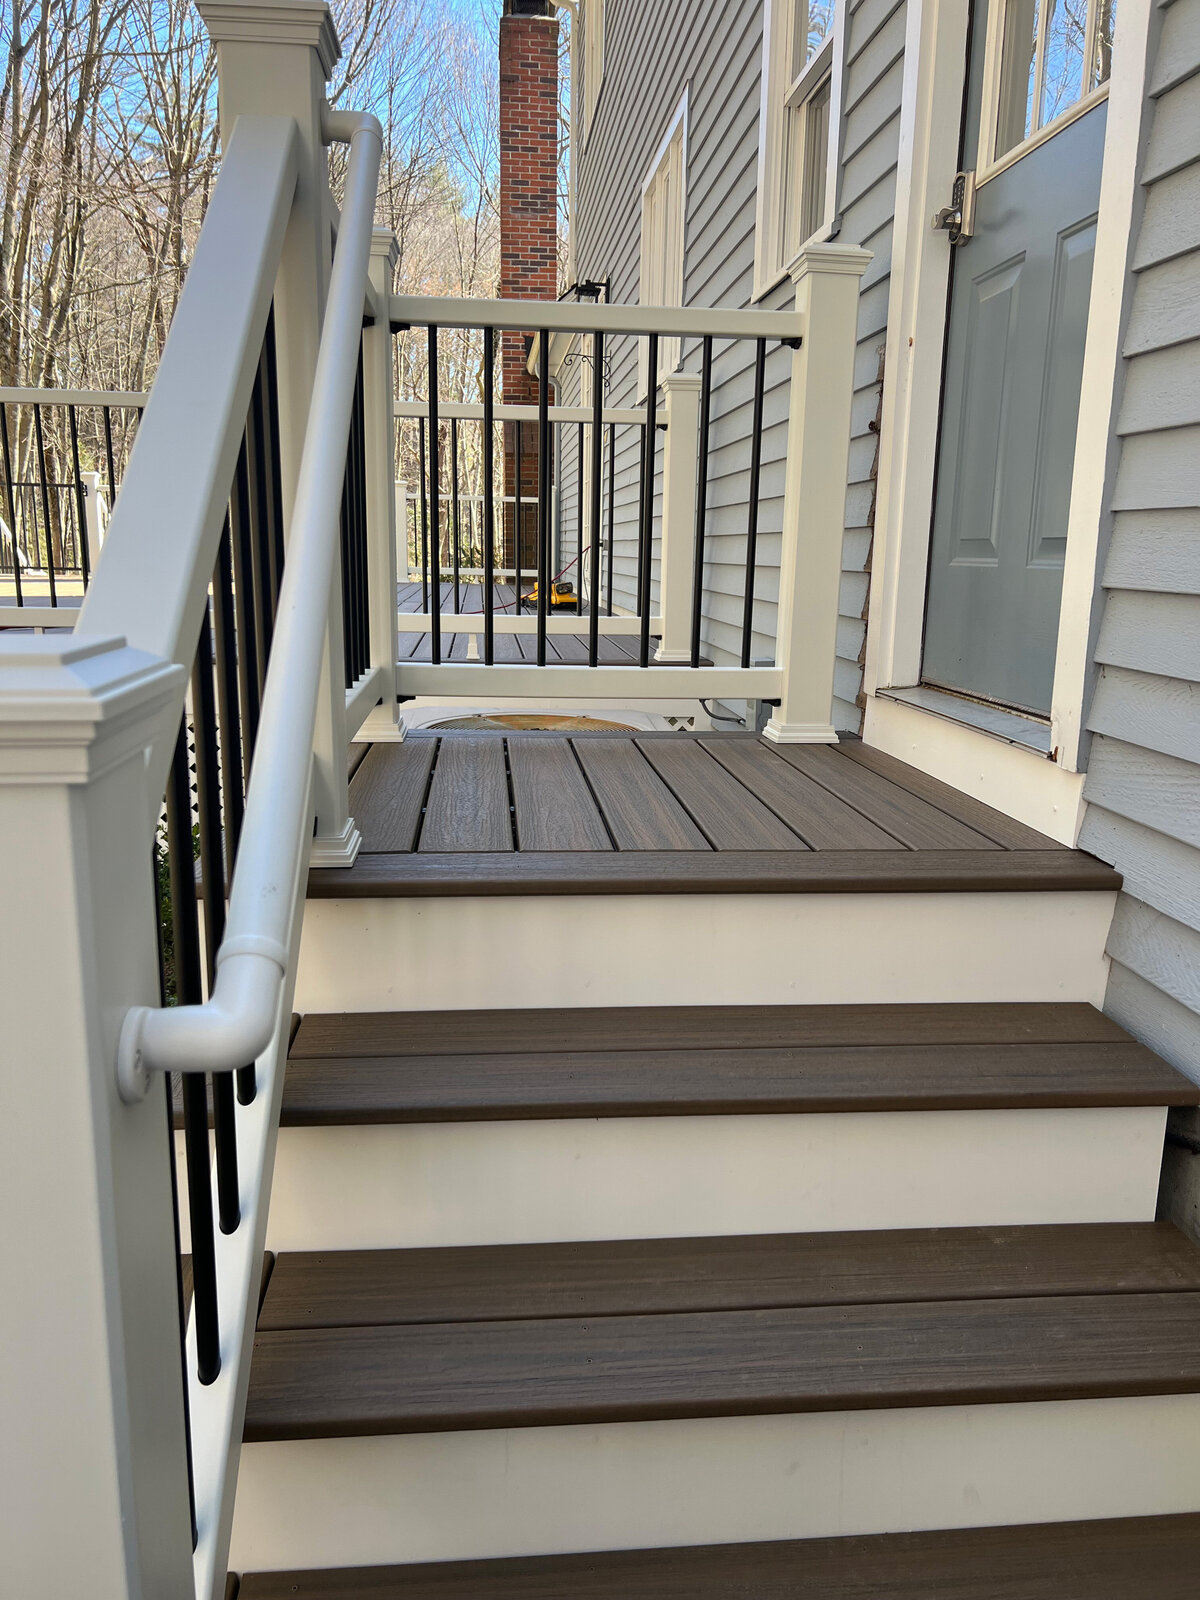 A set of stairs built by a Shrewsbury MA Deck Builder out of dark composite and white PVC railings